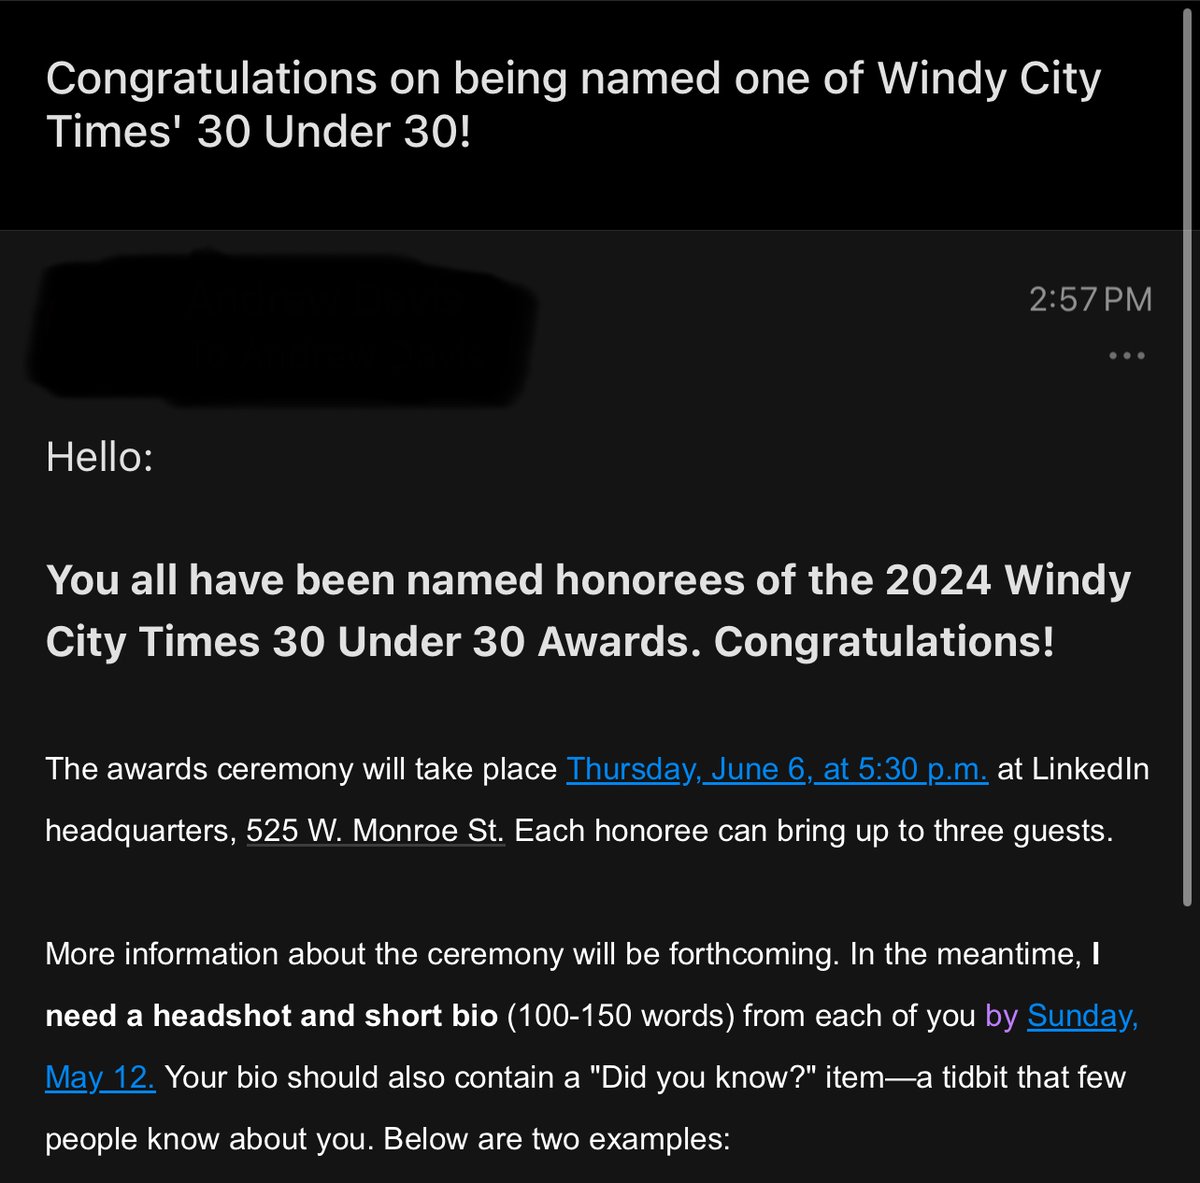 Thank you Windy City Times for honoring me as part of the 2024 30 under 30 (don't worry, I still qualified, I checked)! I don't even know what I've done to earn this recognition but I am very grateful. I'll make sure I'll send in that bio soon!